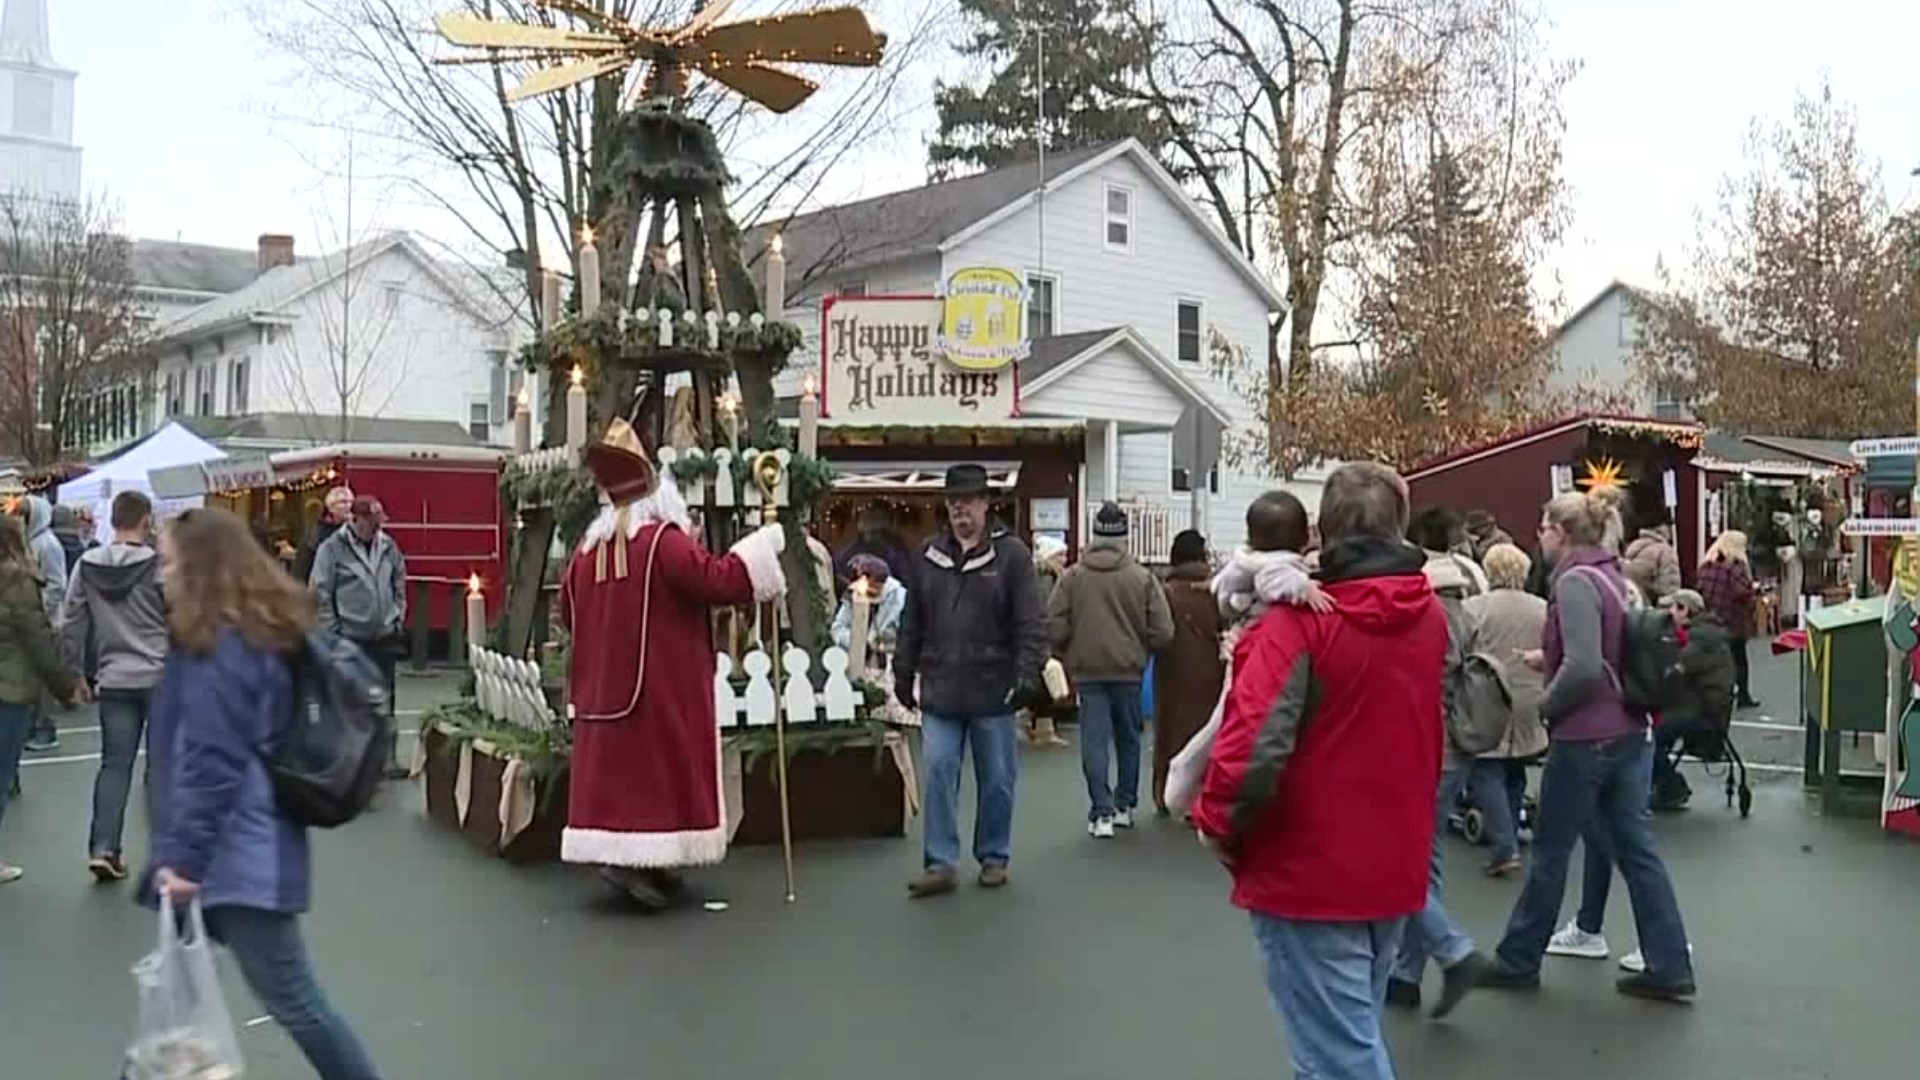 The Christmas event is held every year in Mifflinburg.